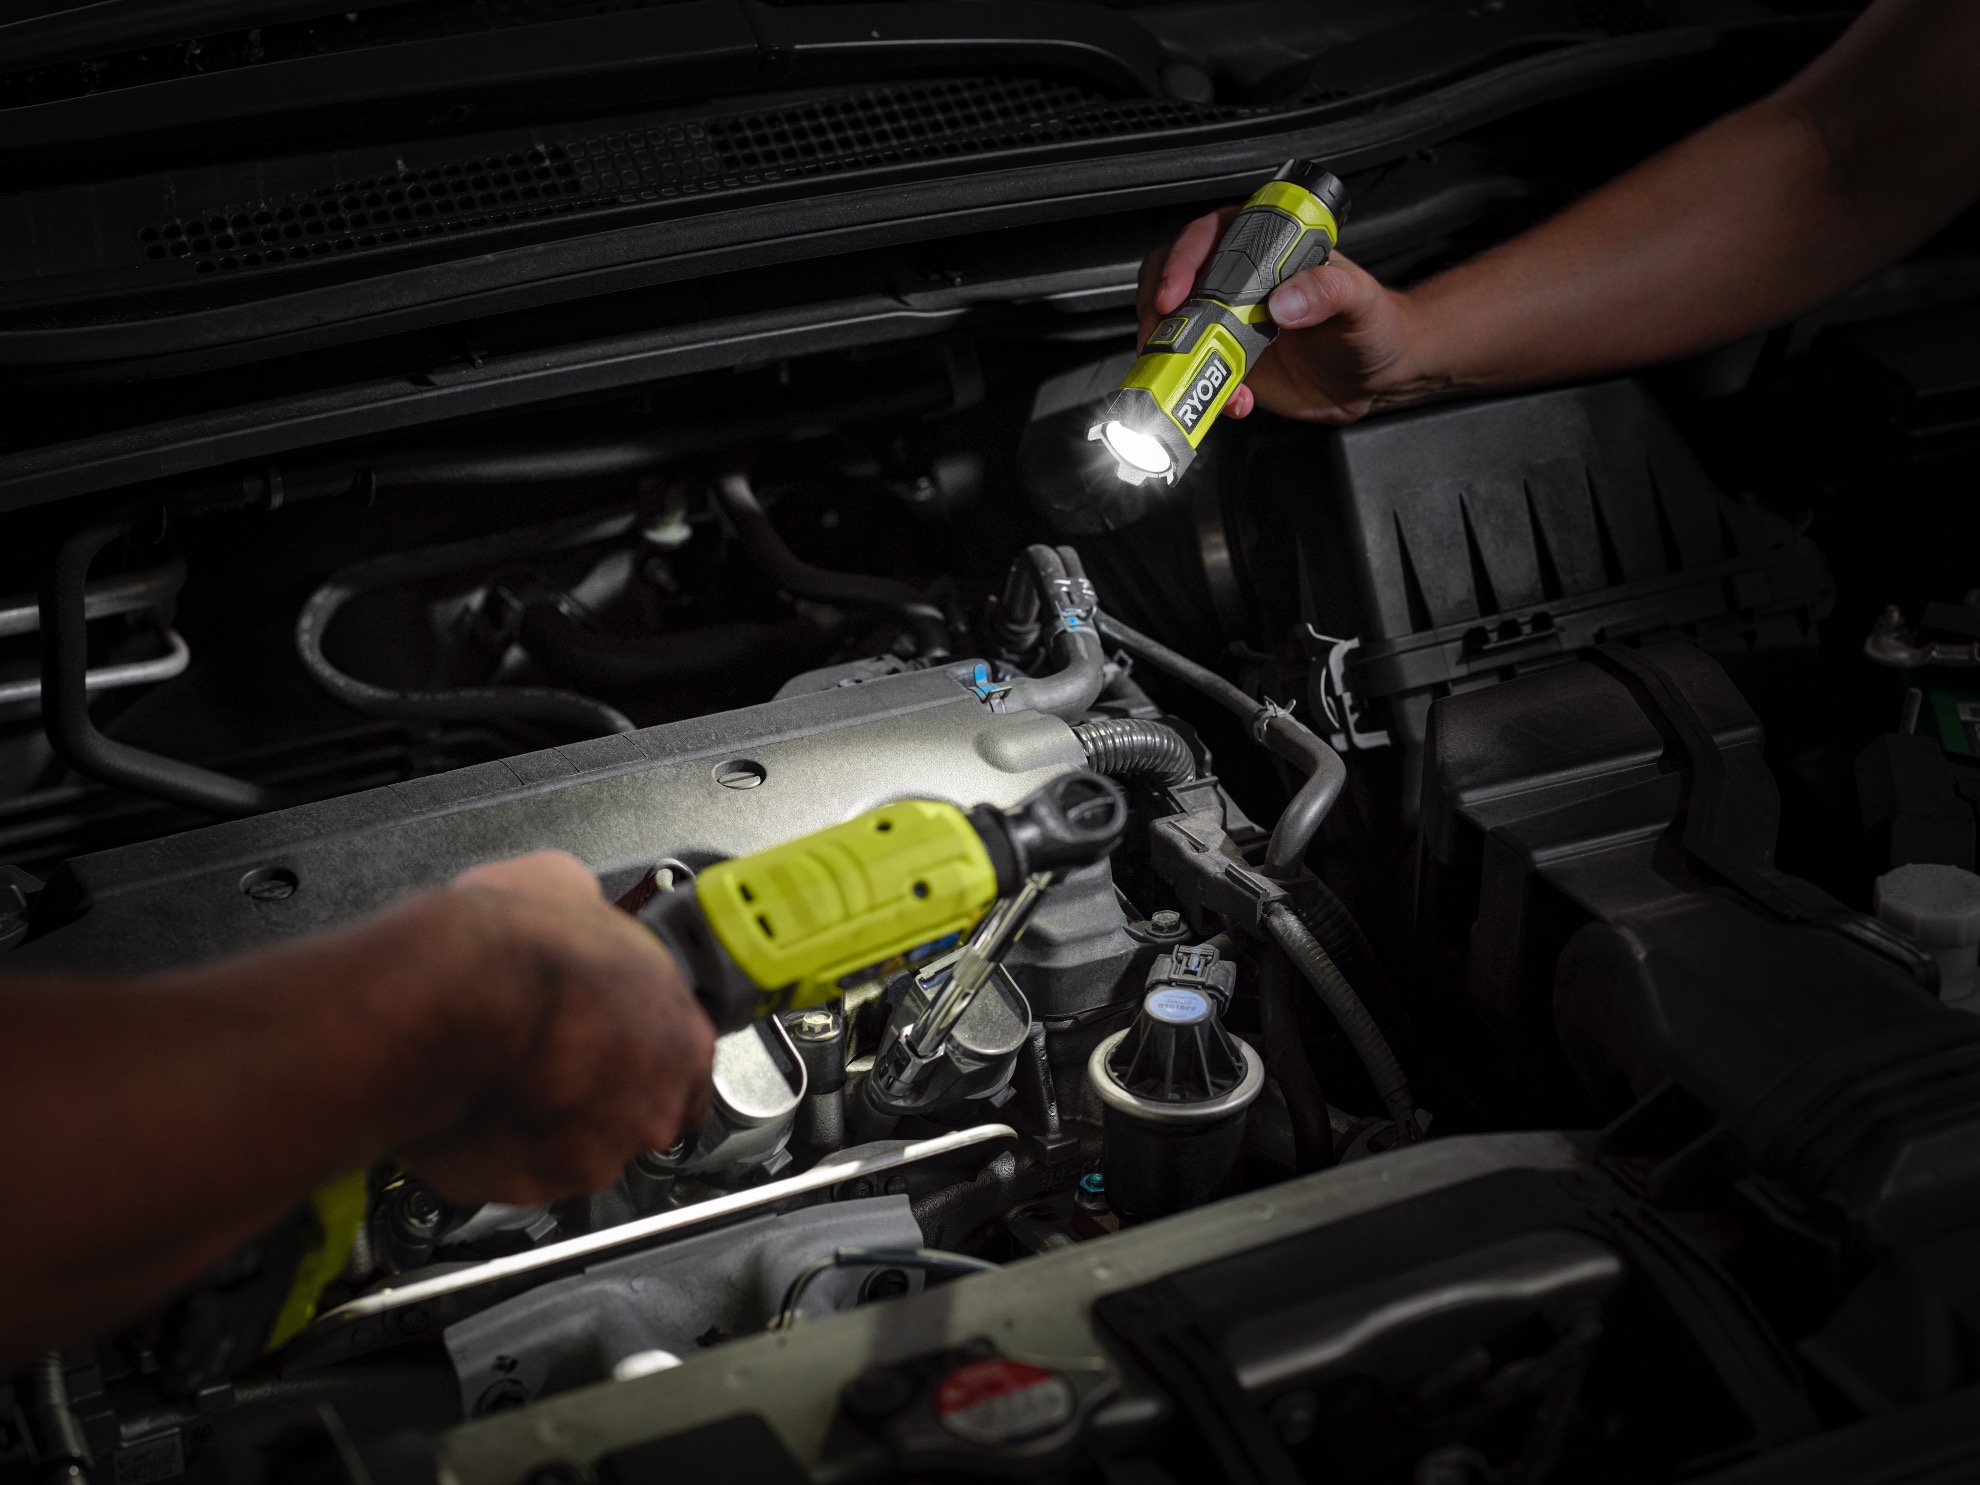 Powered by the RYOBI USB Lithium Battery System 